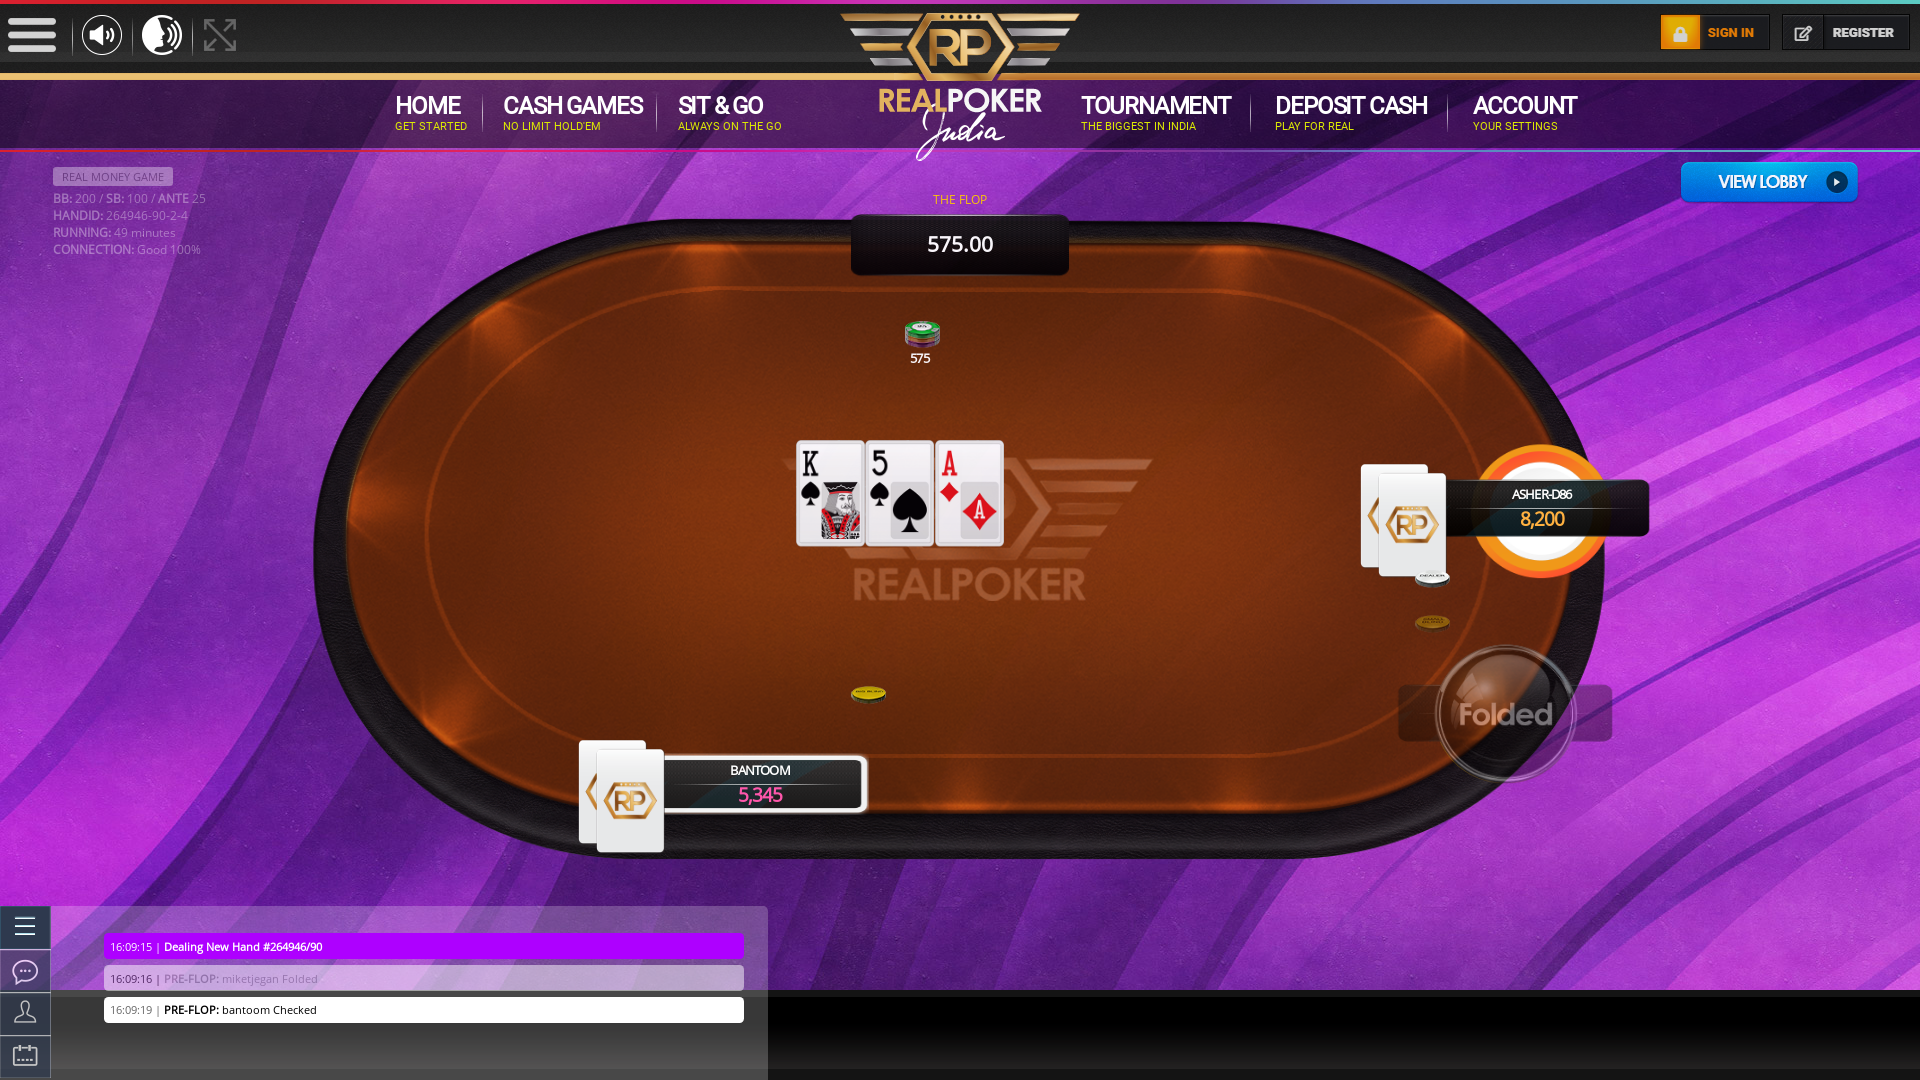 Real poker 10 player table in the 49th minute of the match